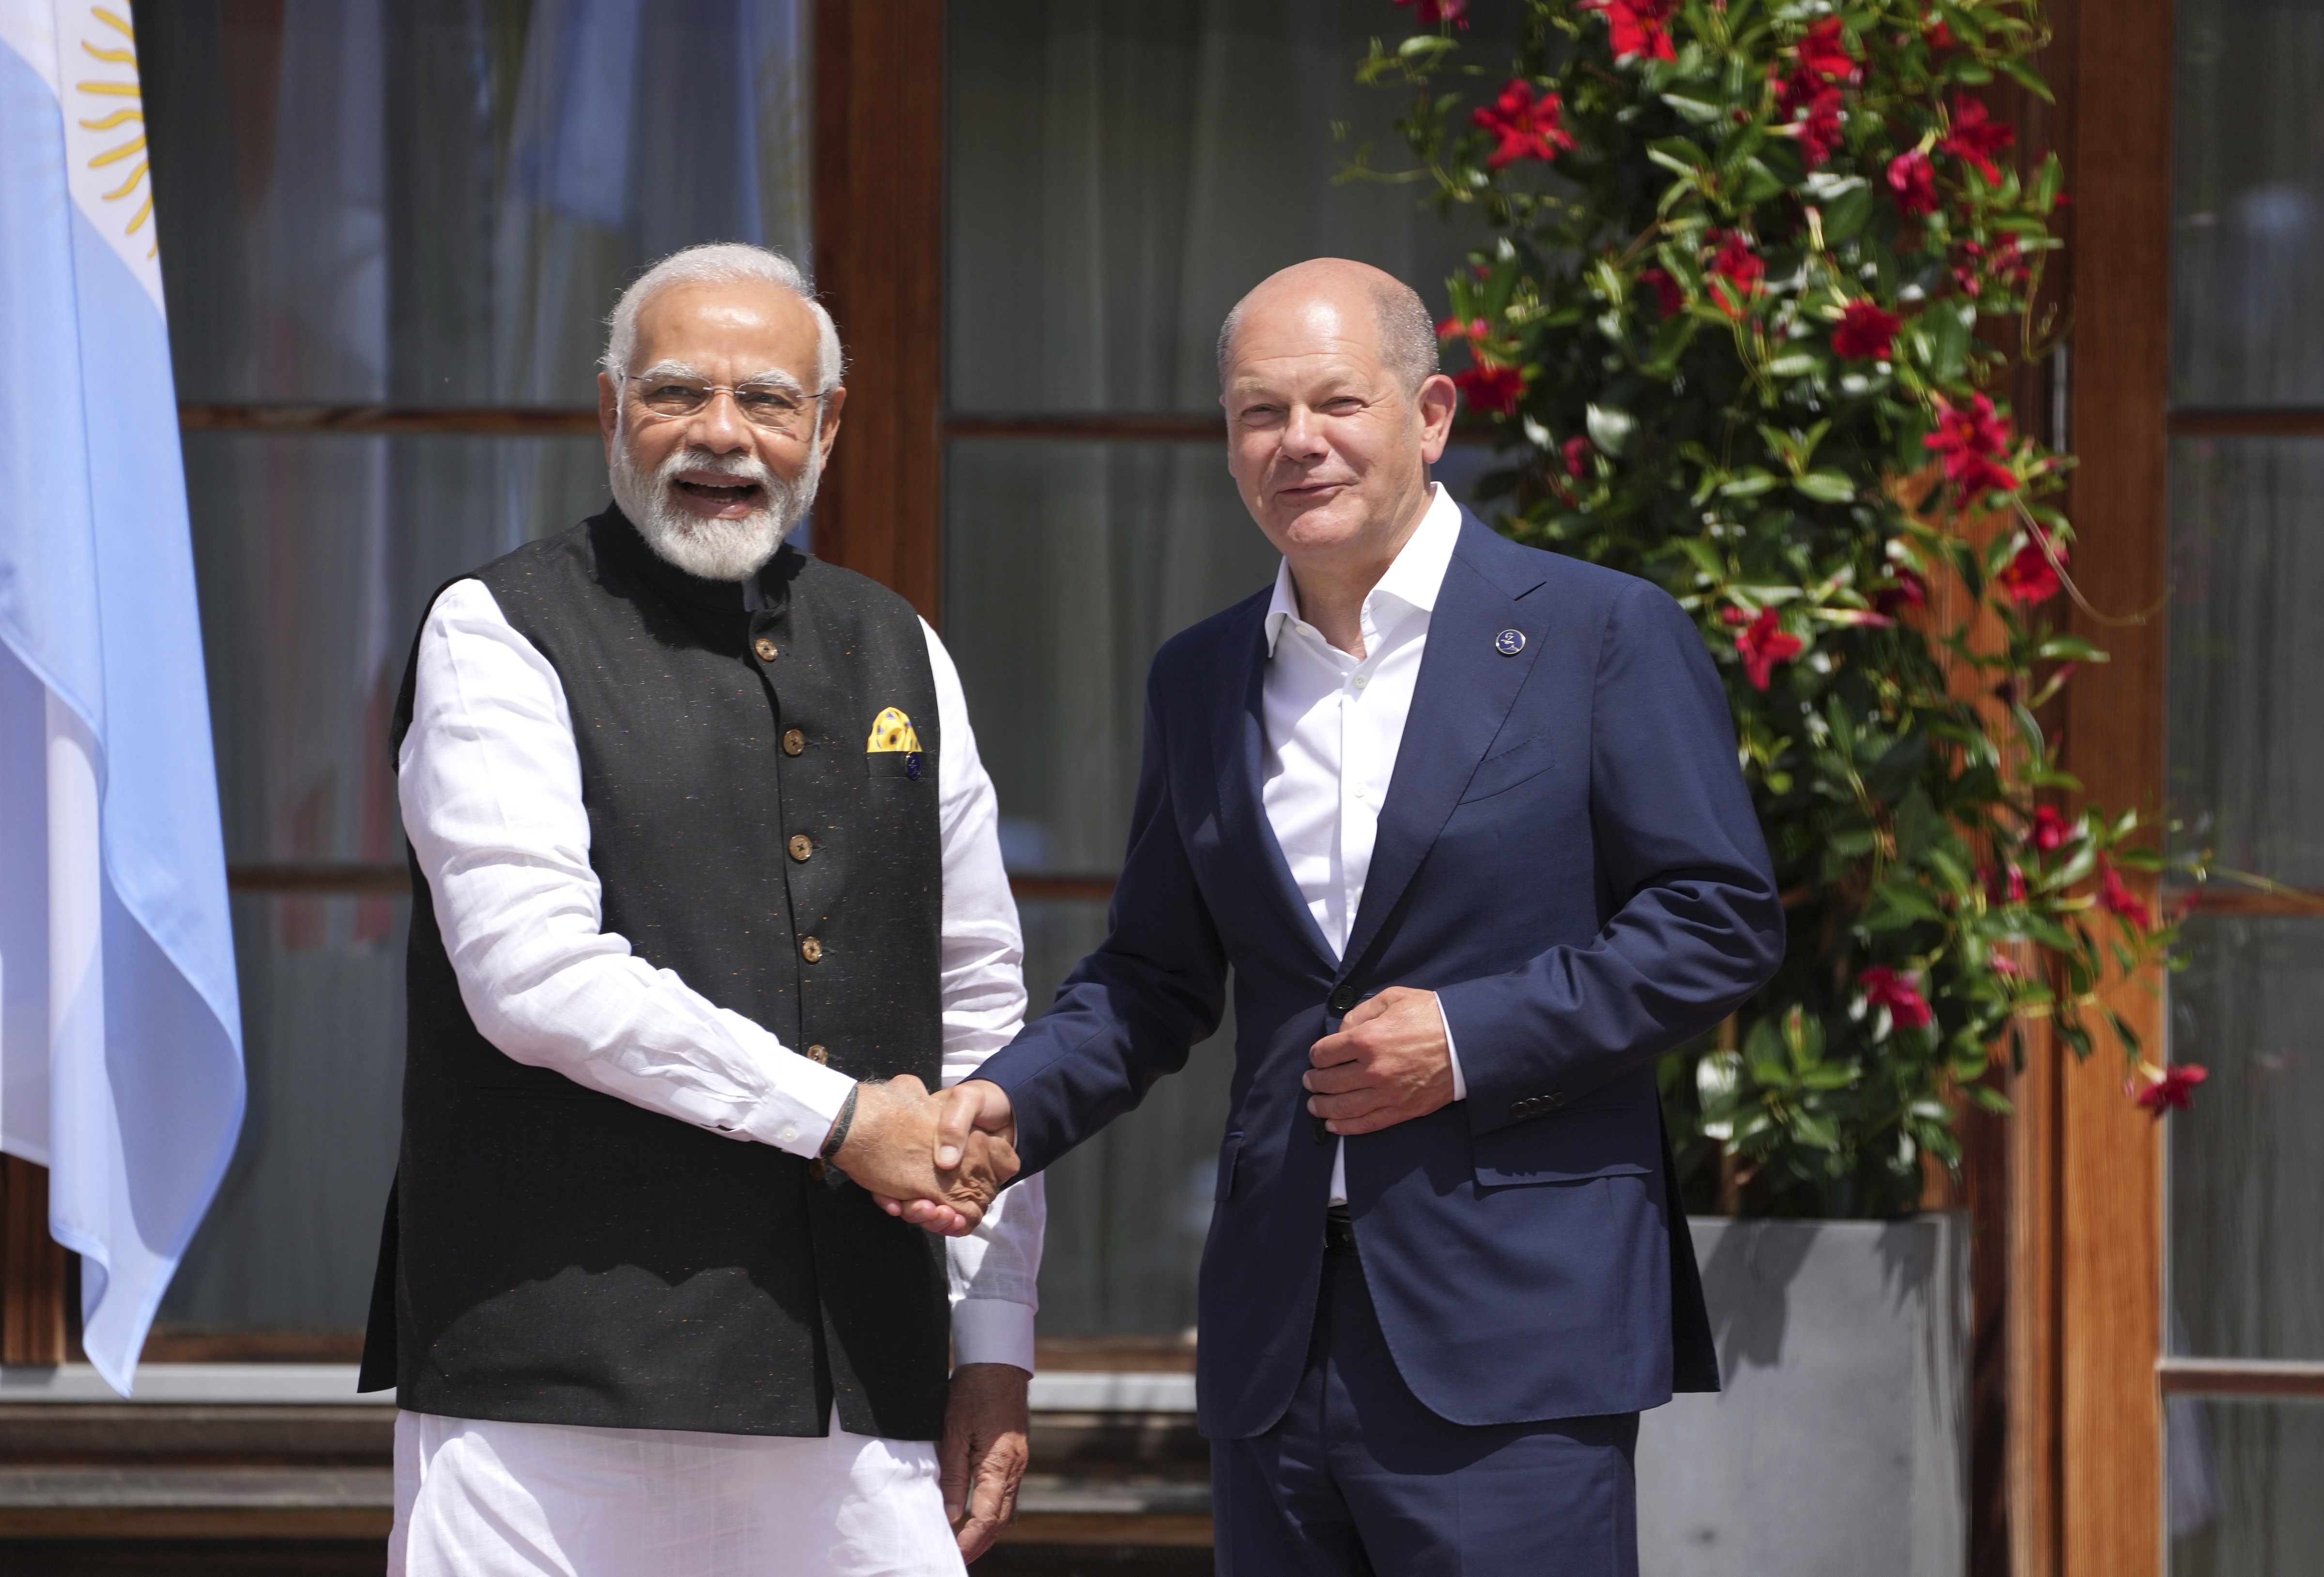 German Chancellor Olaf Scholz welcomes PM Modi at G7 Summit